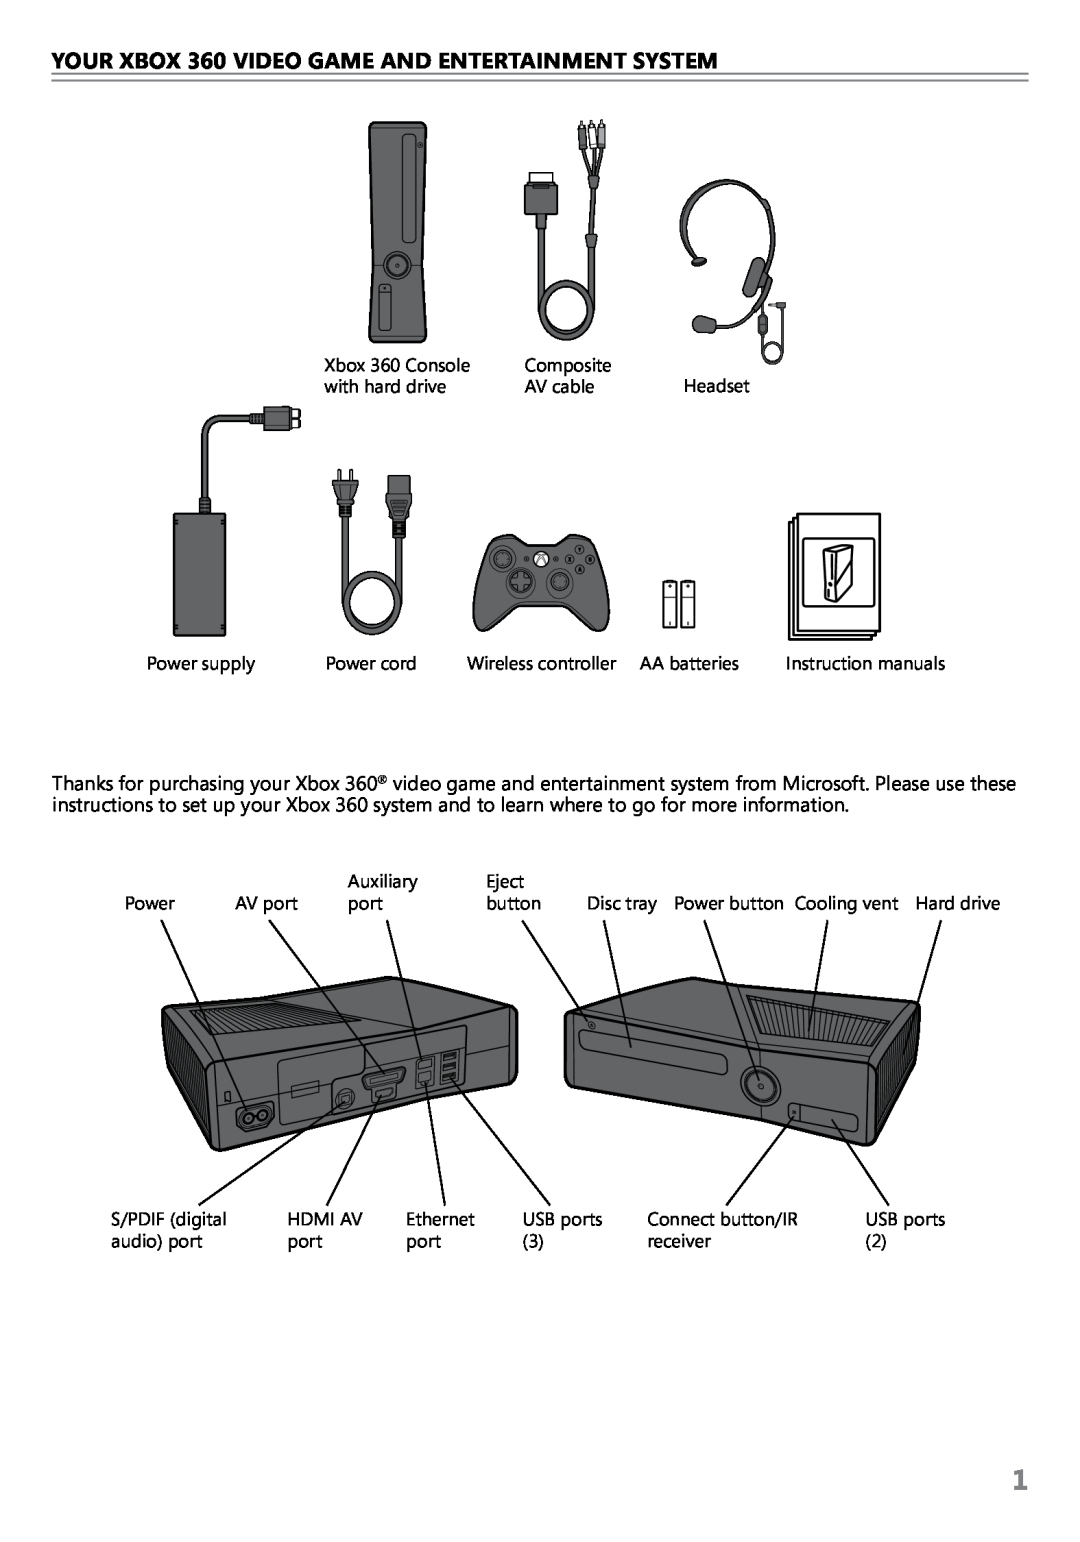 Microsoft S4G00162, S9G-00005 Your Xbox 360 Video Game and Entertainment System, Headset, Instruction manuals, USB ports 